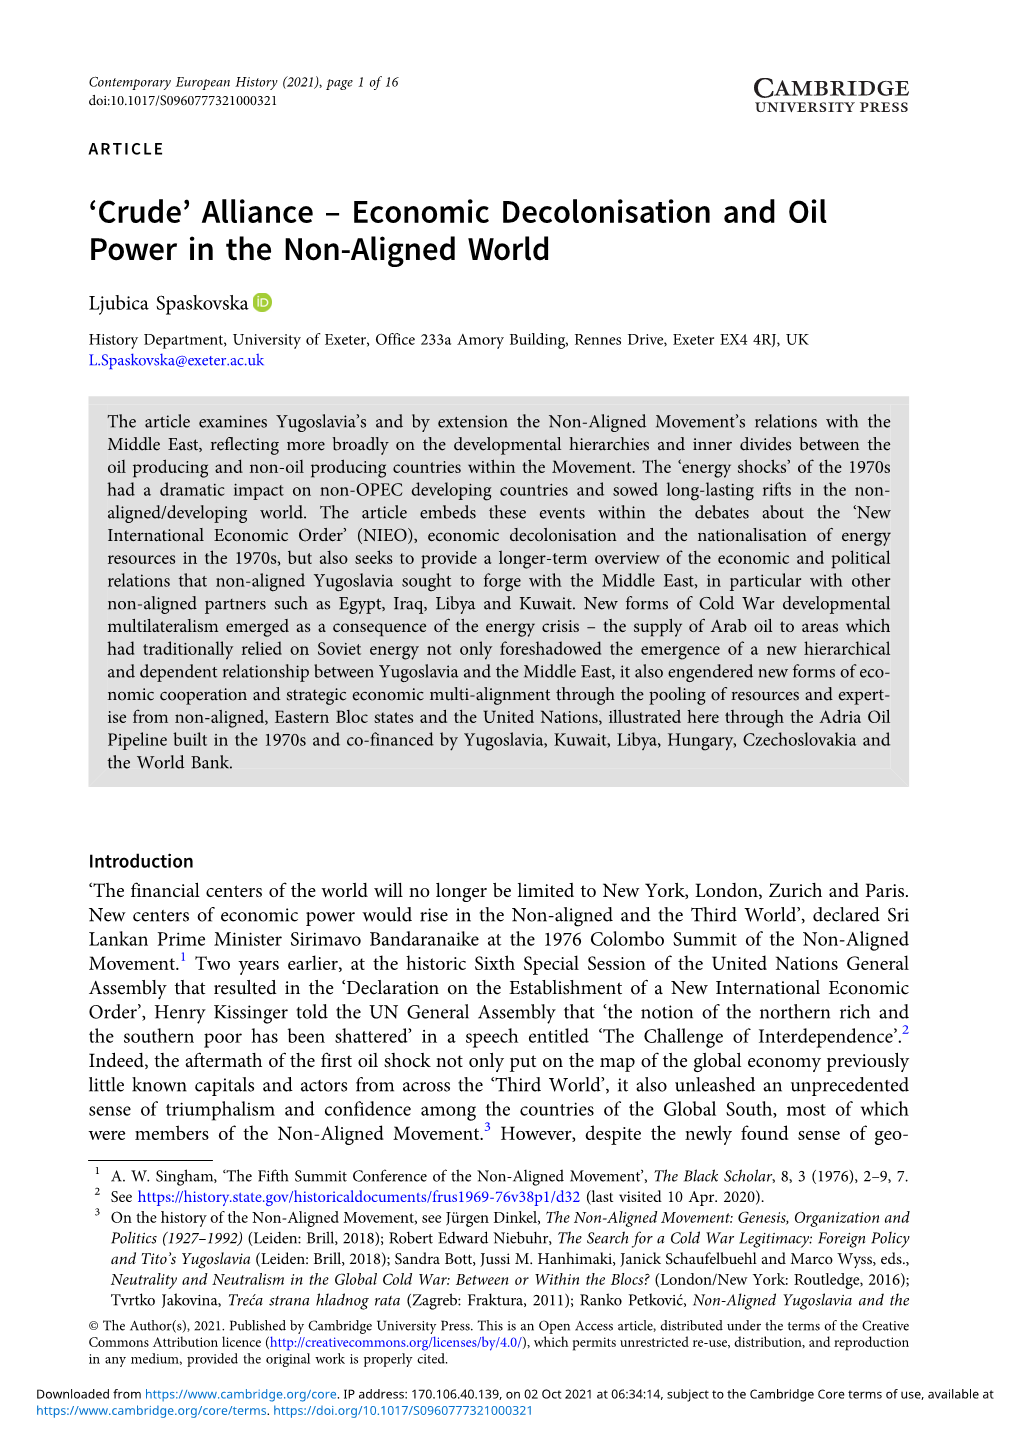 'Crude' Alliance – Economic Decolonisation and Oil Power in the Non-Aligned World